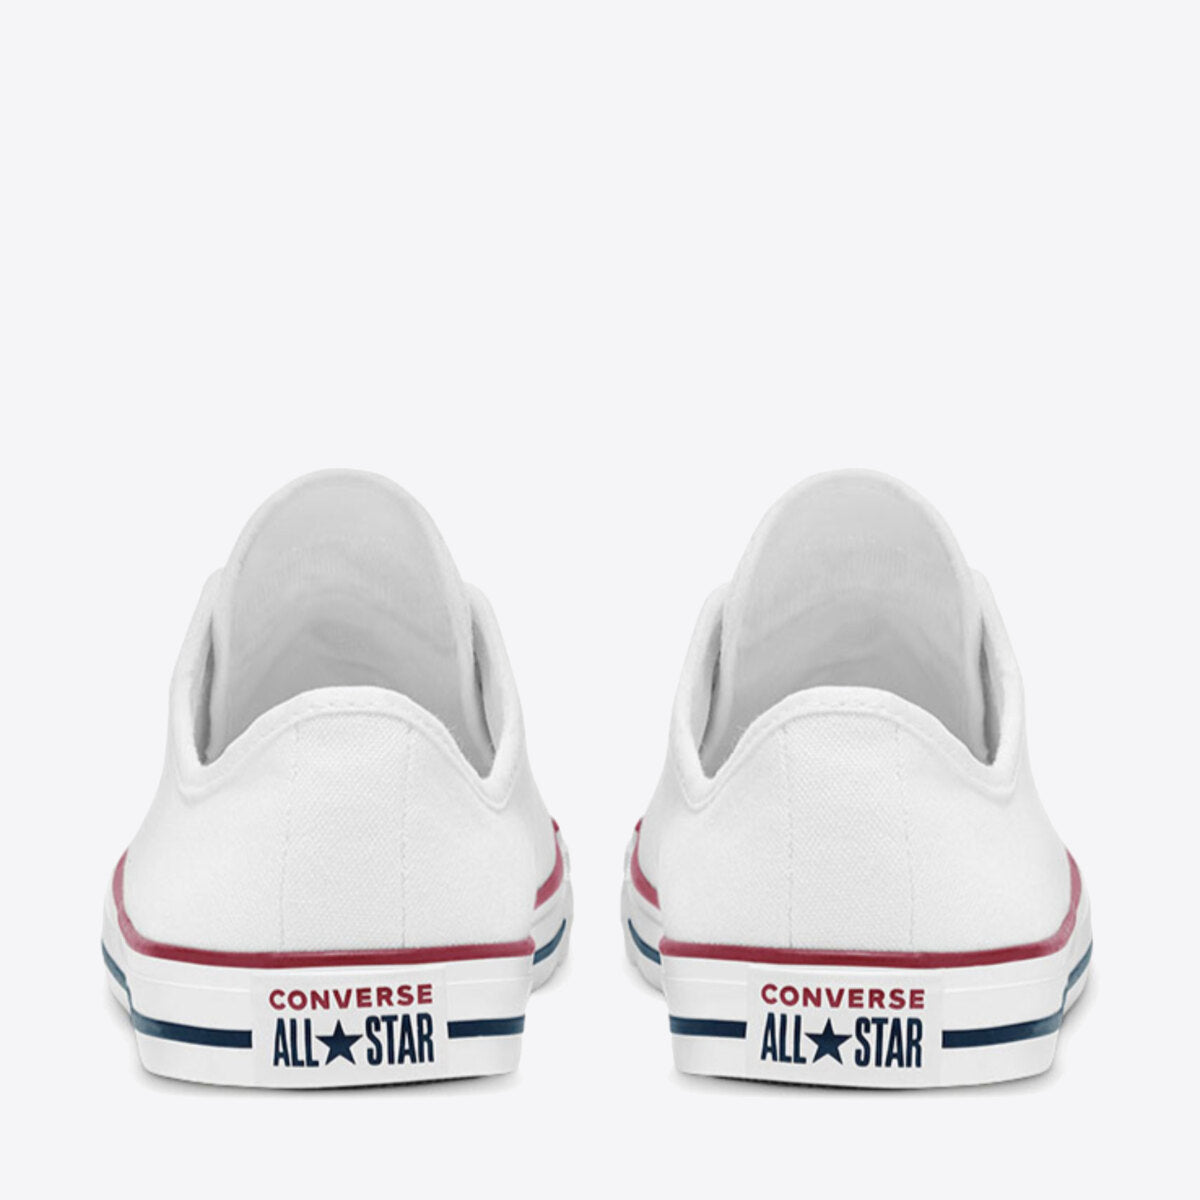 CONVERSE Dainty 2.0 Canvas Low White - Image 0